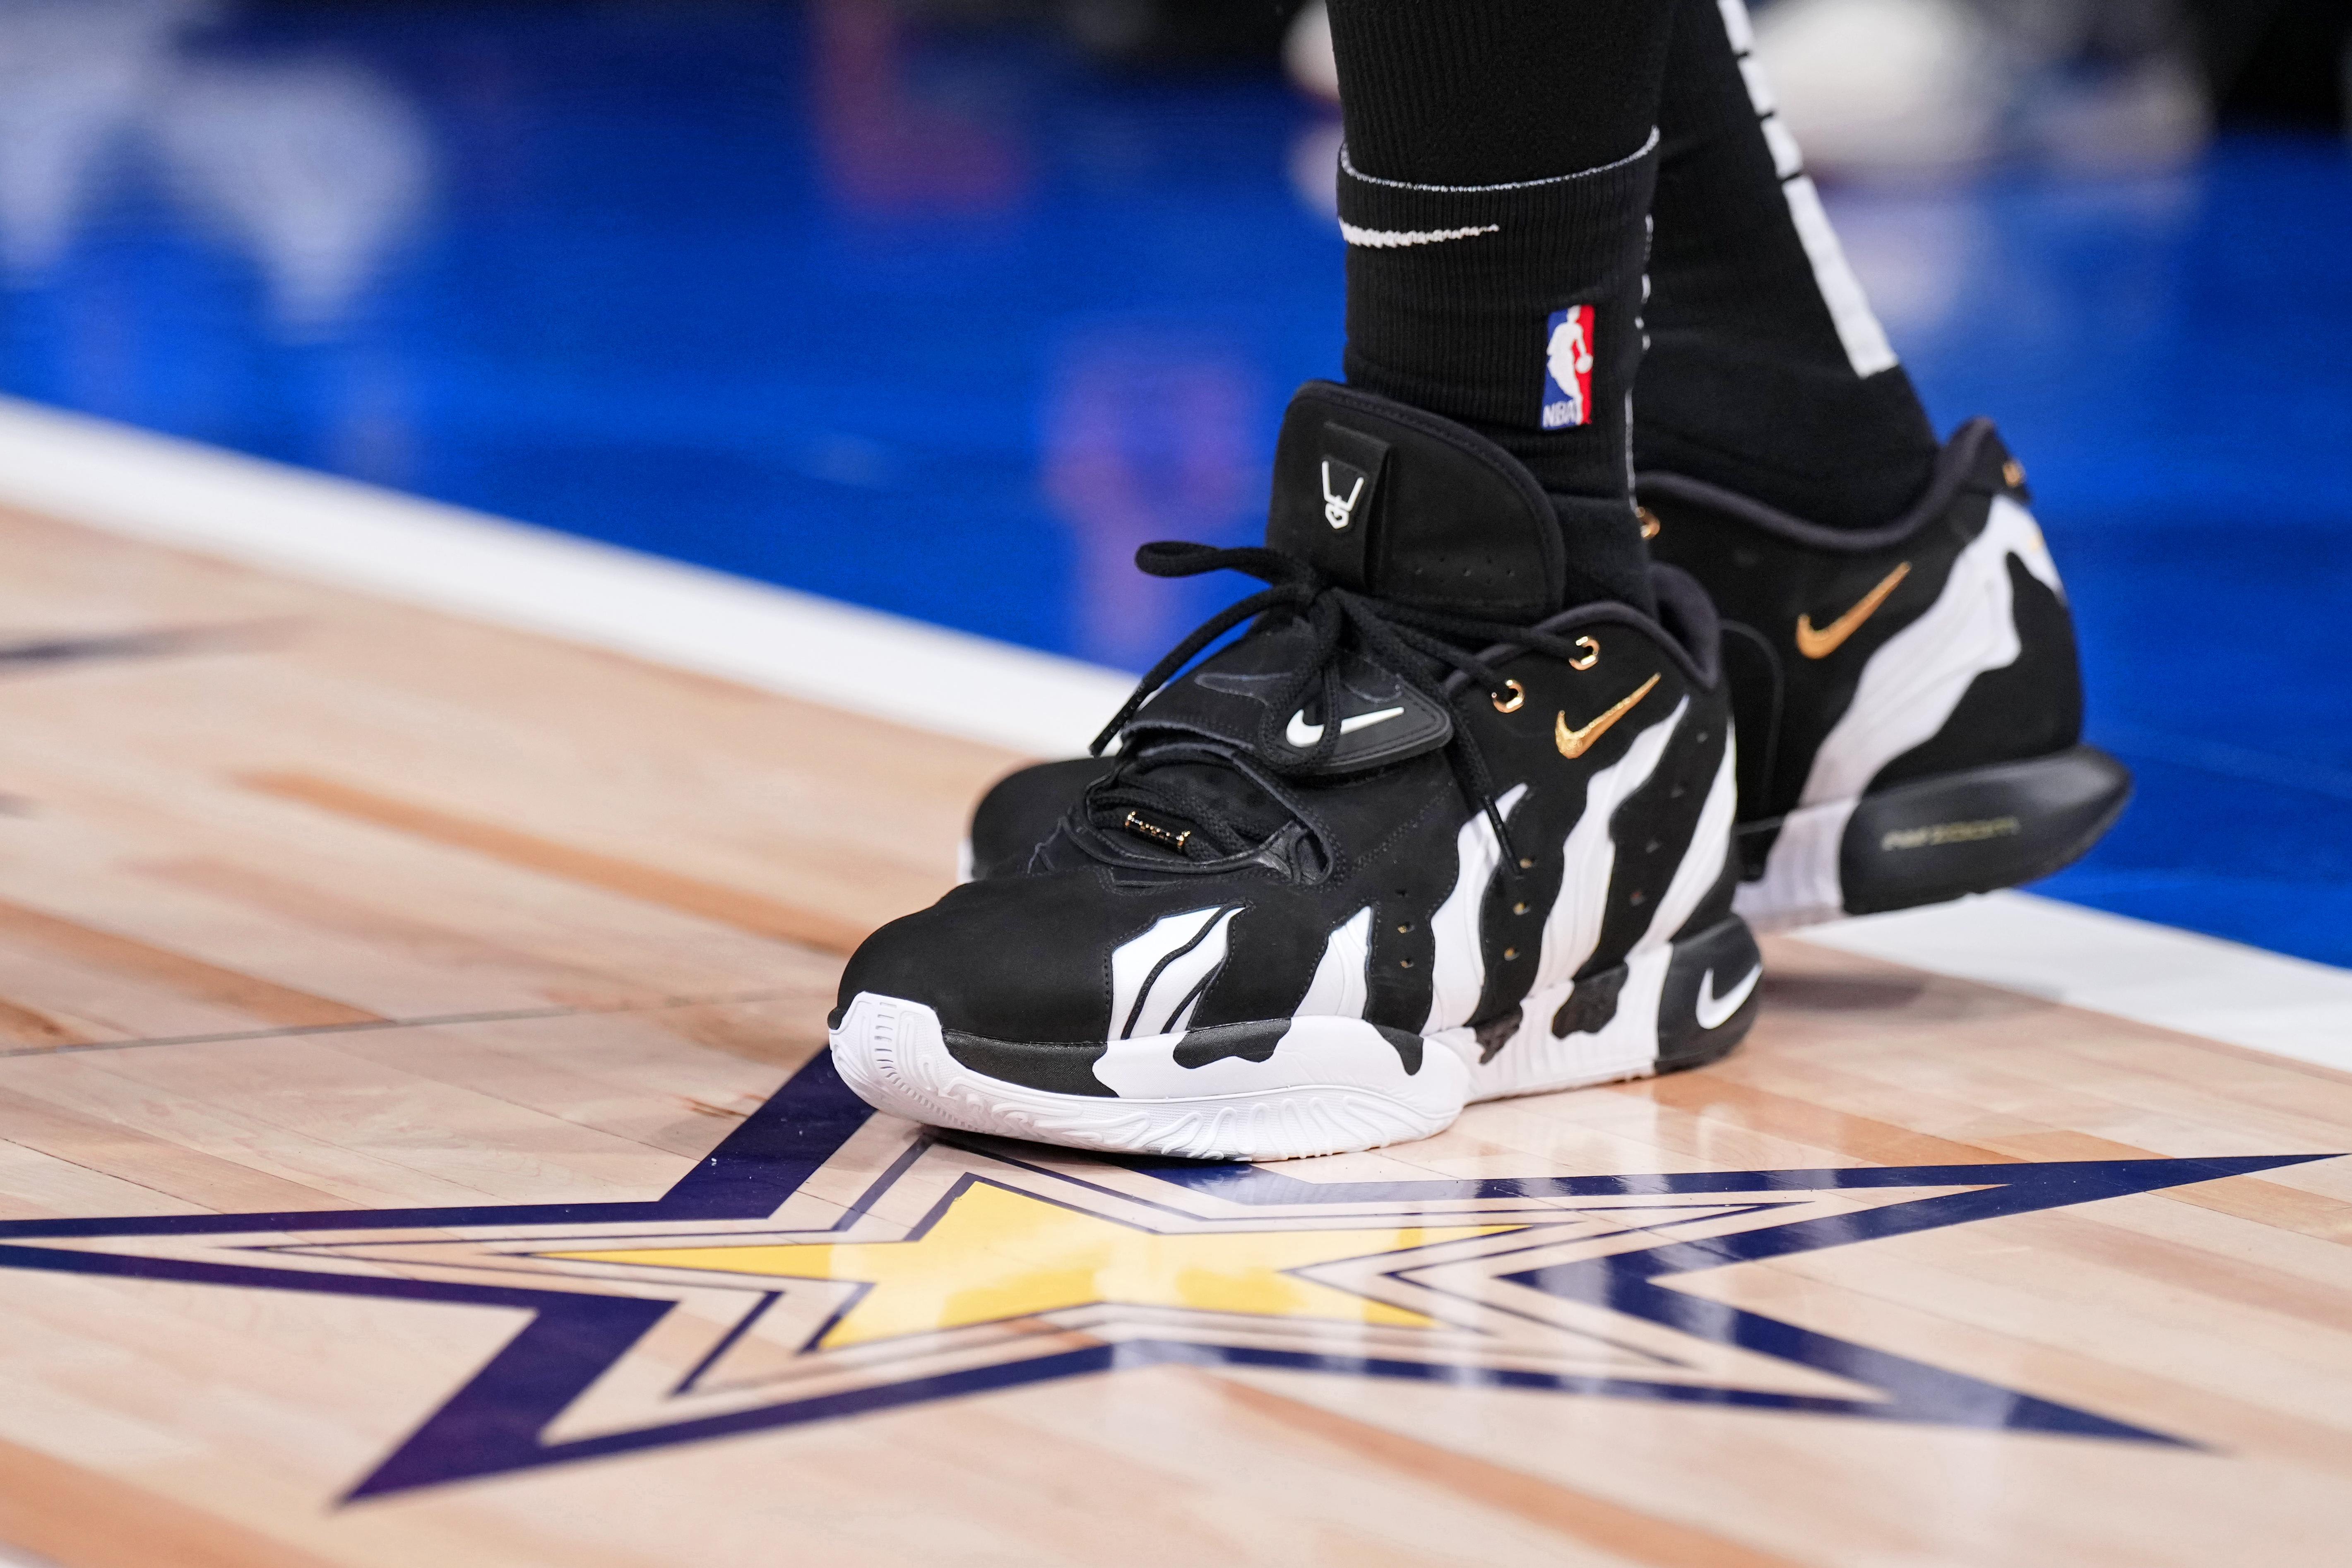 Los Angeles Lakers forward LeBron James' black and white Nike sneakers.